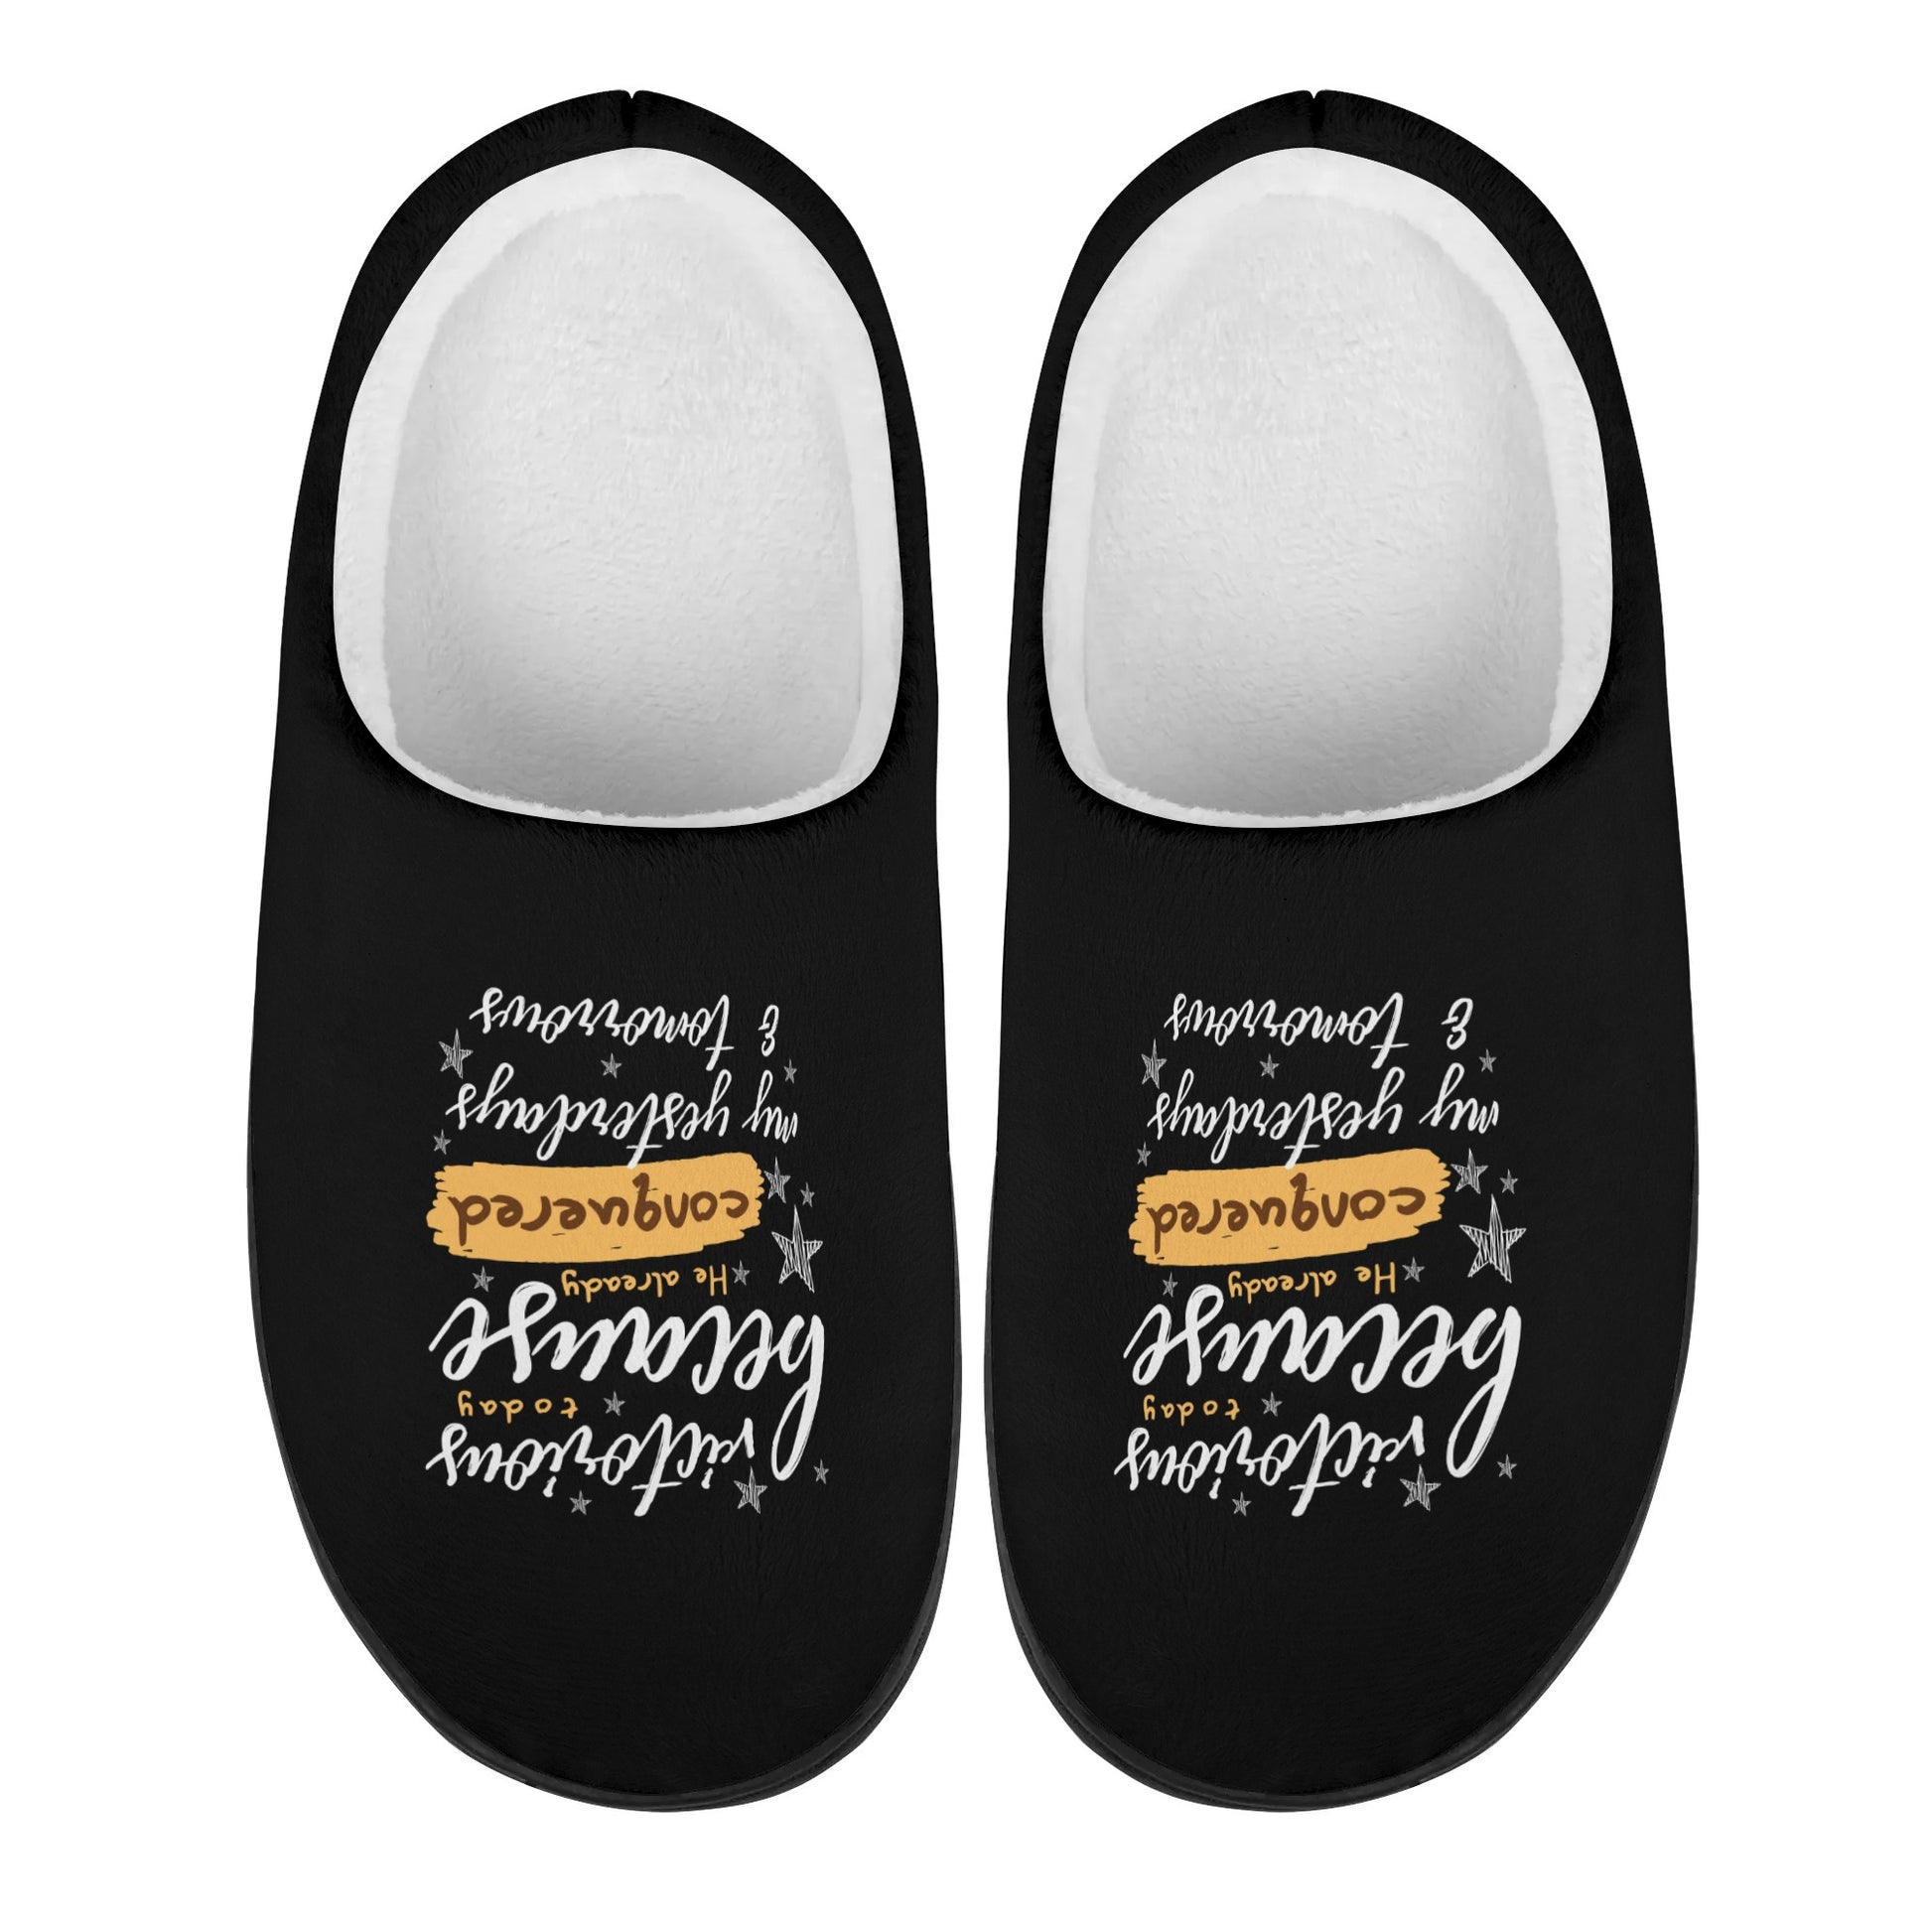 Victorious Today Unisex Rubber Autumn Christian Slipper Room Shoes popcustoms